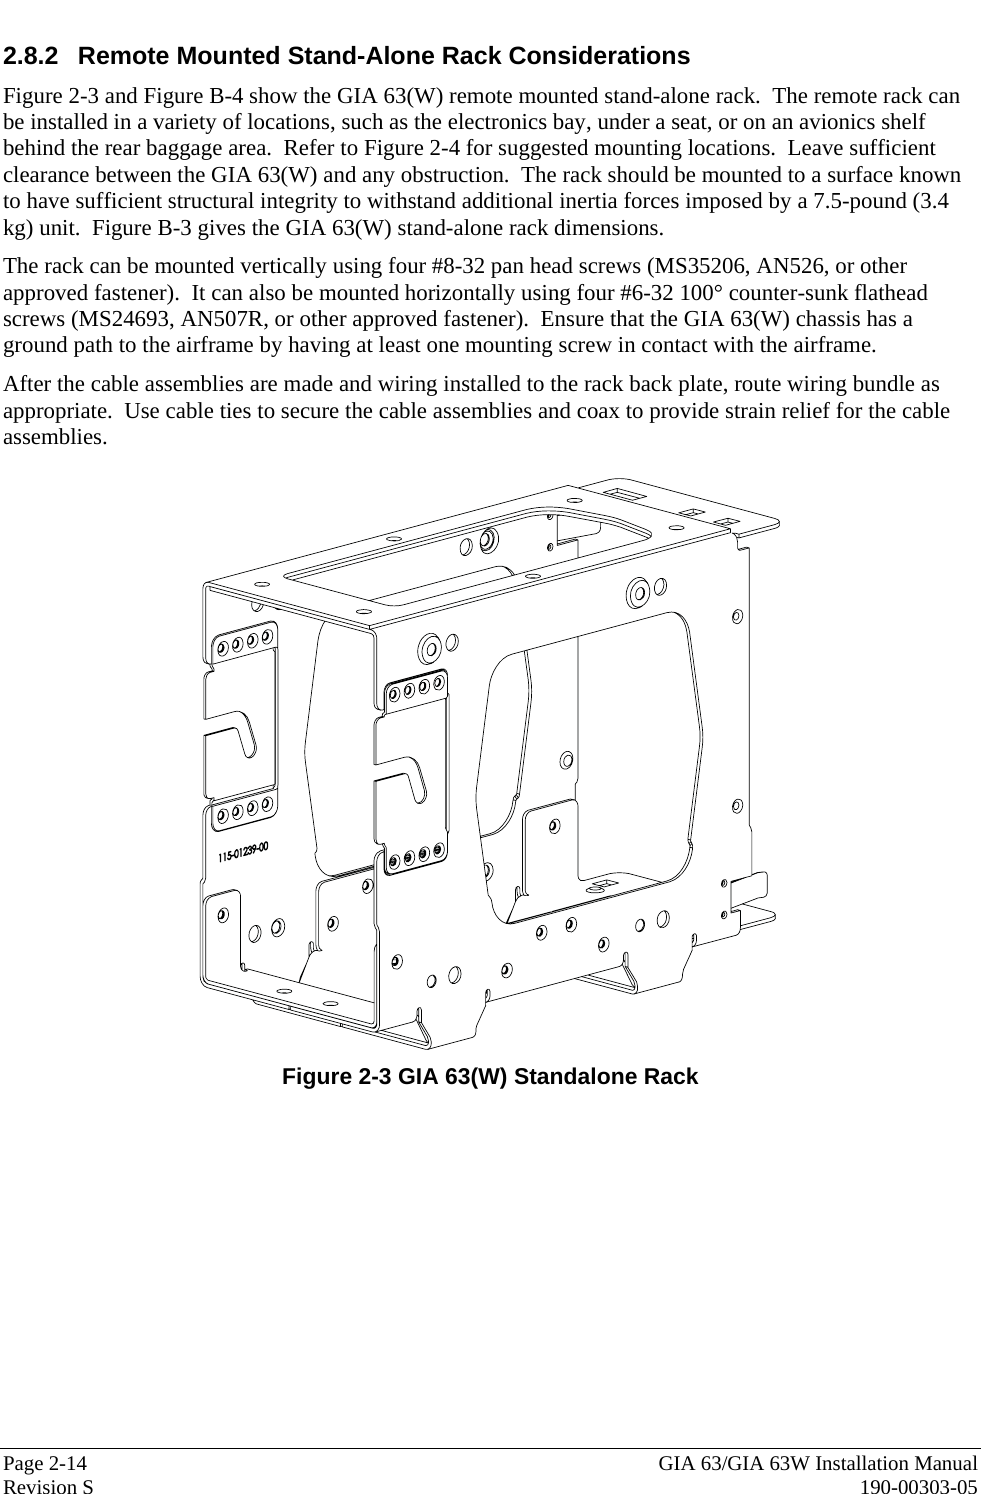  Page 2-14  GIA 63/GIA 63W Installation Manual Revision S  190-00303-05 2.8.2  Remote Mounted Stand-Alone Rack Considerations Figure 2-3 and Figure B-4 show the GIA 63(W) remote mounted stand-alone rack.  The remote rack can be installed in a variety of locations, such as the electronics bay, under a seat, or on an avionics shelf behind the rear baggage area.  Refer to Figure 2-4 for suggested mounting locations.  Leave sufficient clearance between the GIA 63(W) and any obstruction.  The rack should be mounted to a surface known to have sufficient structural integrity to withstand additional inertia forces imposed by a 7.5-pound (3.4 kg) unit.  Figure B-3 gives the GIA 63(W) stand-alone rack dimensions.   The rack can be mounted vertically using four #8-32 pan head screws (MS35206, AN526, or other approved fastener).  It can also be mounted horizontally using four #6-32 100° counter-sunk flathead screws (MS24693, AN507R, or other approved fastener).  Ensure that the GIA 63(W) chassis has a ground path to the airframe by having at least one mounting screw in contact with the airframe.   After the cable assemblies are made and wiring installed to the rack back plate, route wiring bundle as appropriate.  Use cable ties to secure the cable assemblies and coax to provide strain relief for the cable assemblies.    Figure 2-3 GIA 63(W) Standalone Rack 